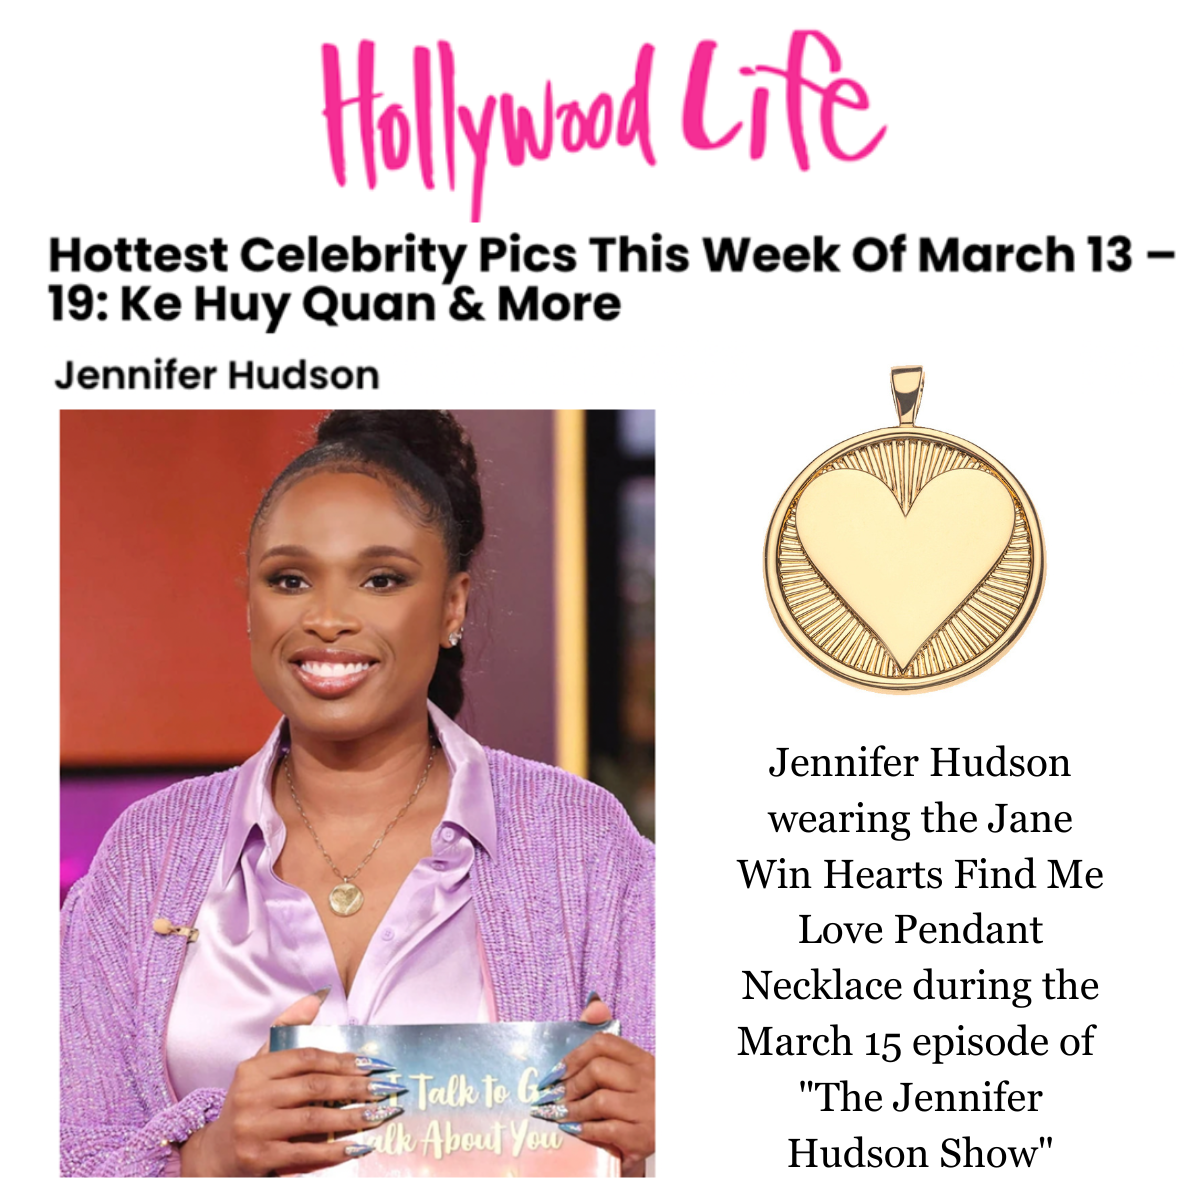 Press Highlight: Hollywood Life's 'Hottest' - J Hud in Jane Win!